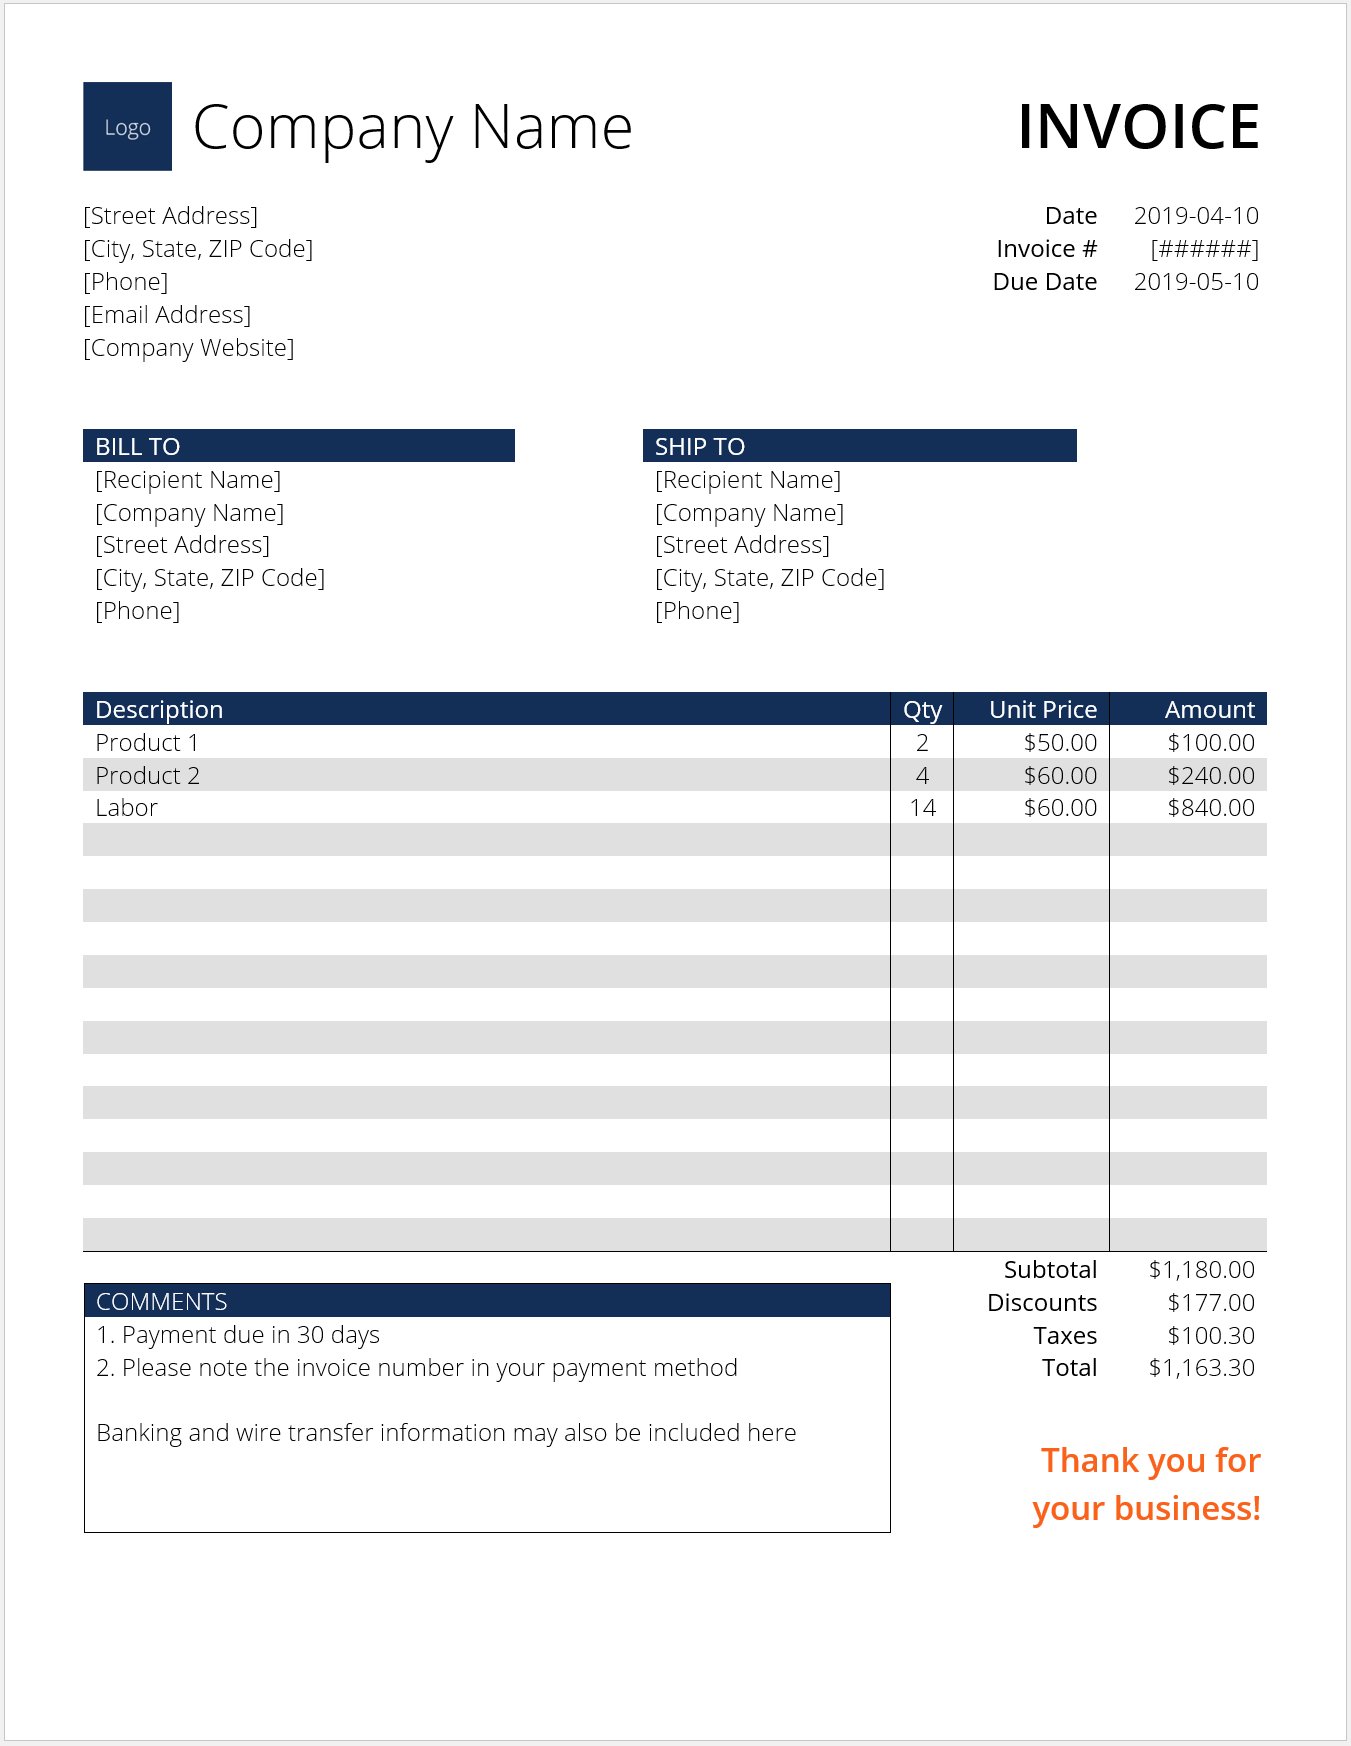 Invoice Template (Word) – Download Free Template At Cfi Regarding Net 30 Invoice Template